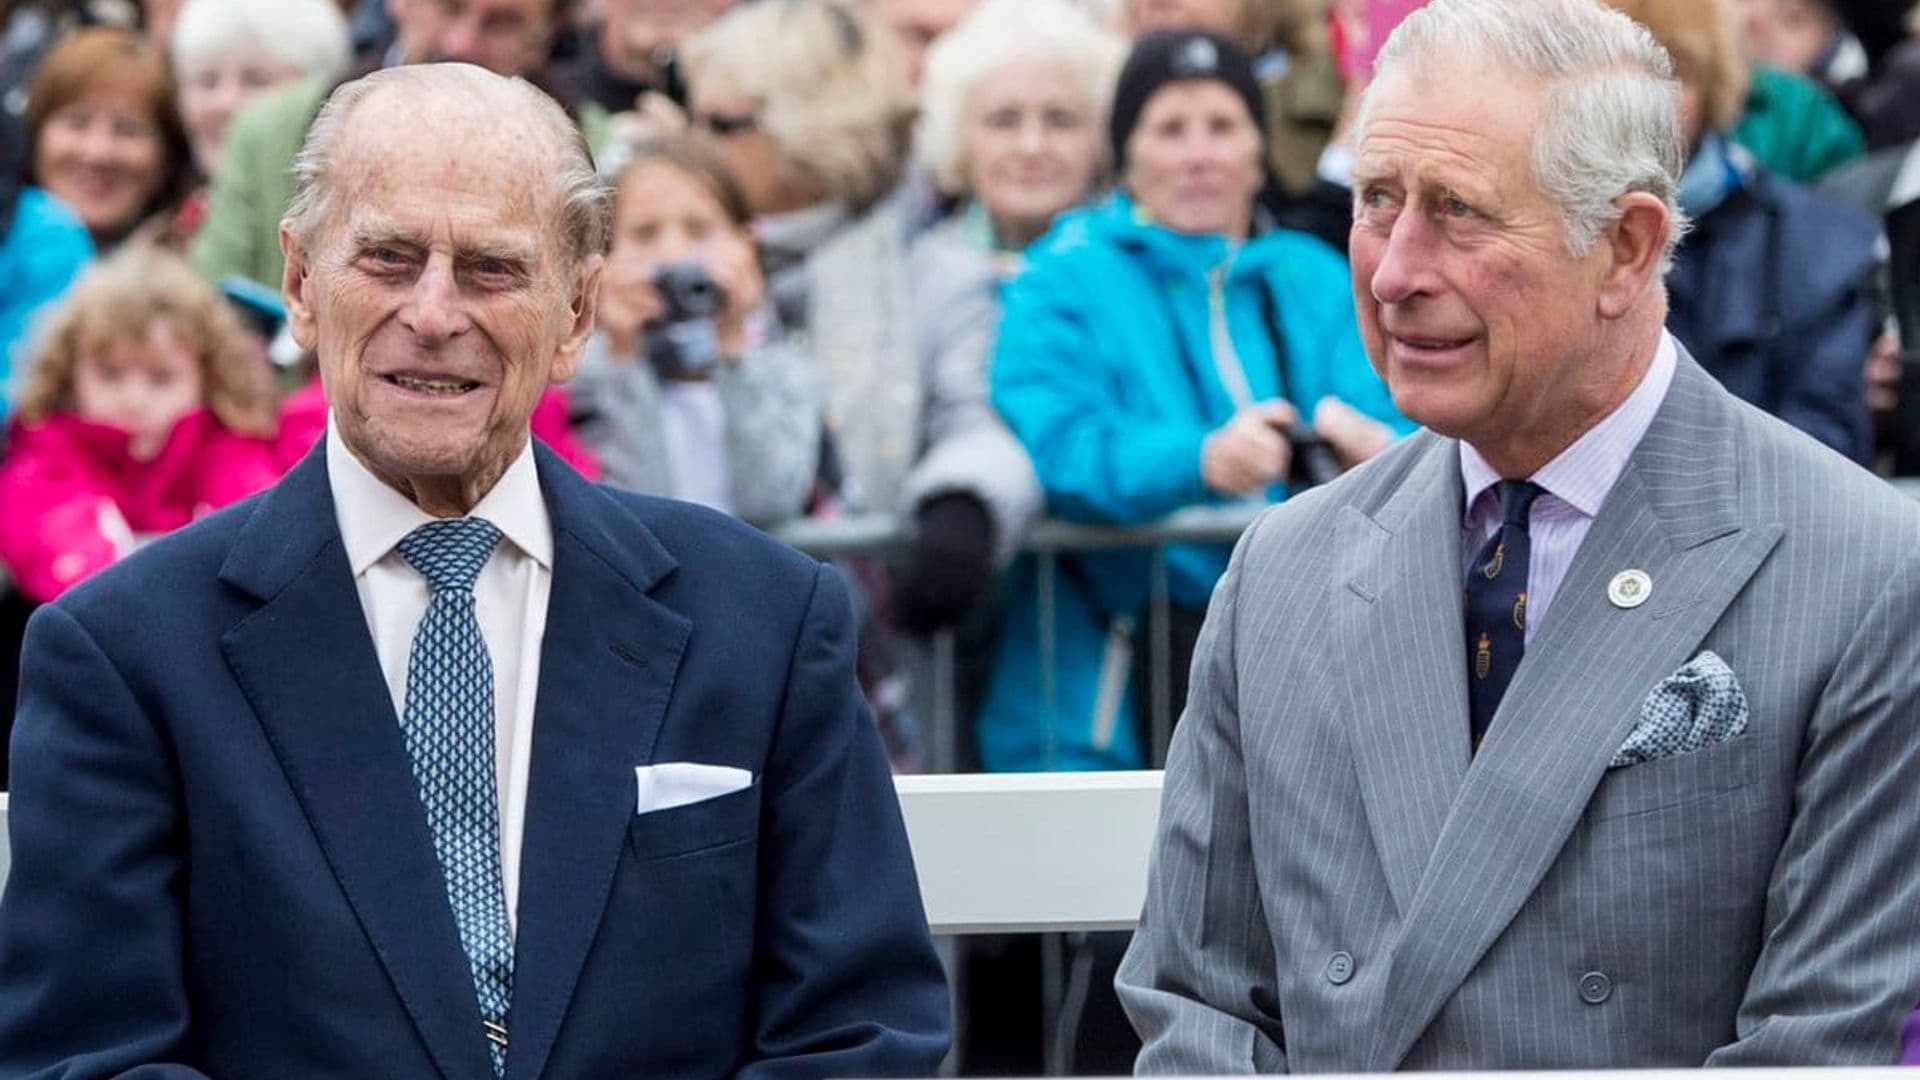 Prince Charles says his family 'will have an empty seat' at the dinner table following Prince Philip's death